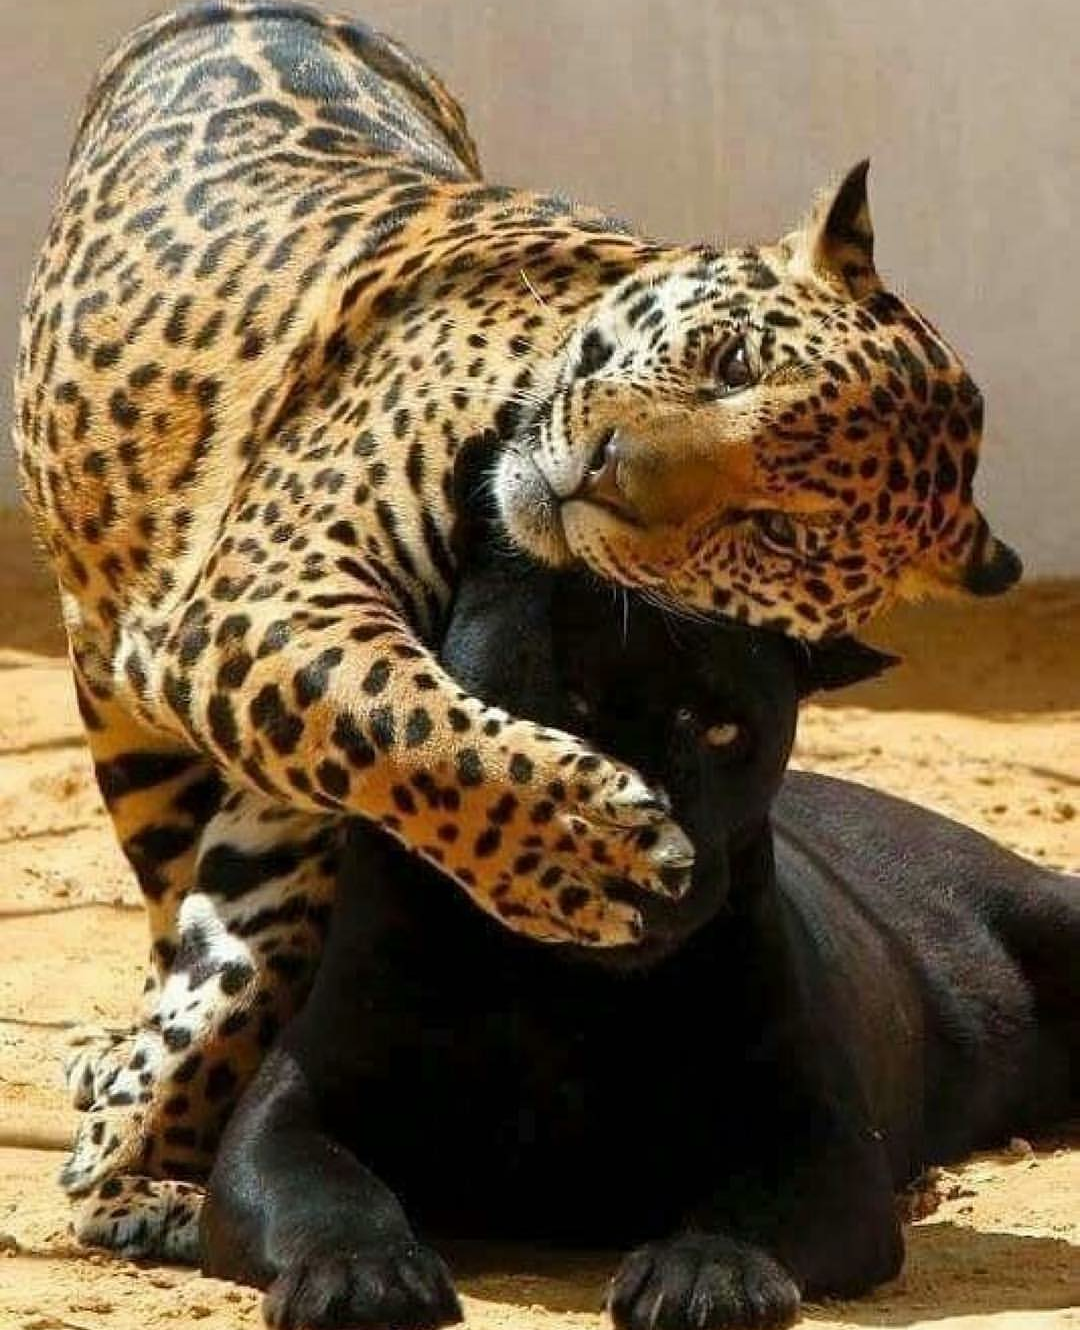 Hugs - Hugs, Leopard, Panther, The photo, Wild animals, Cat family